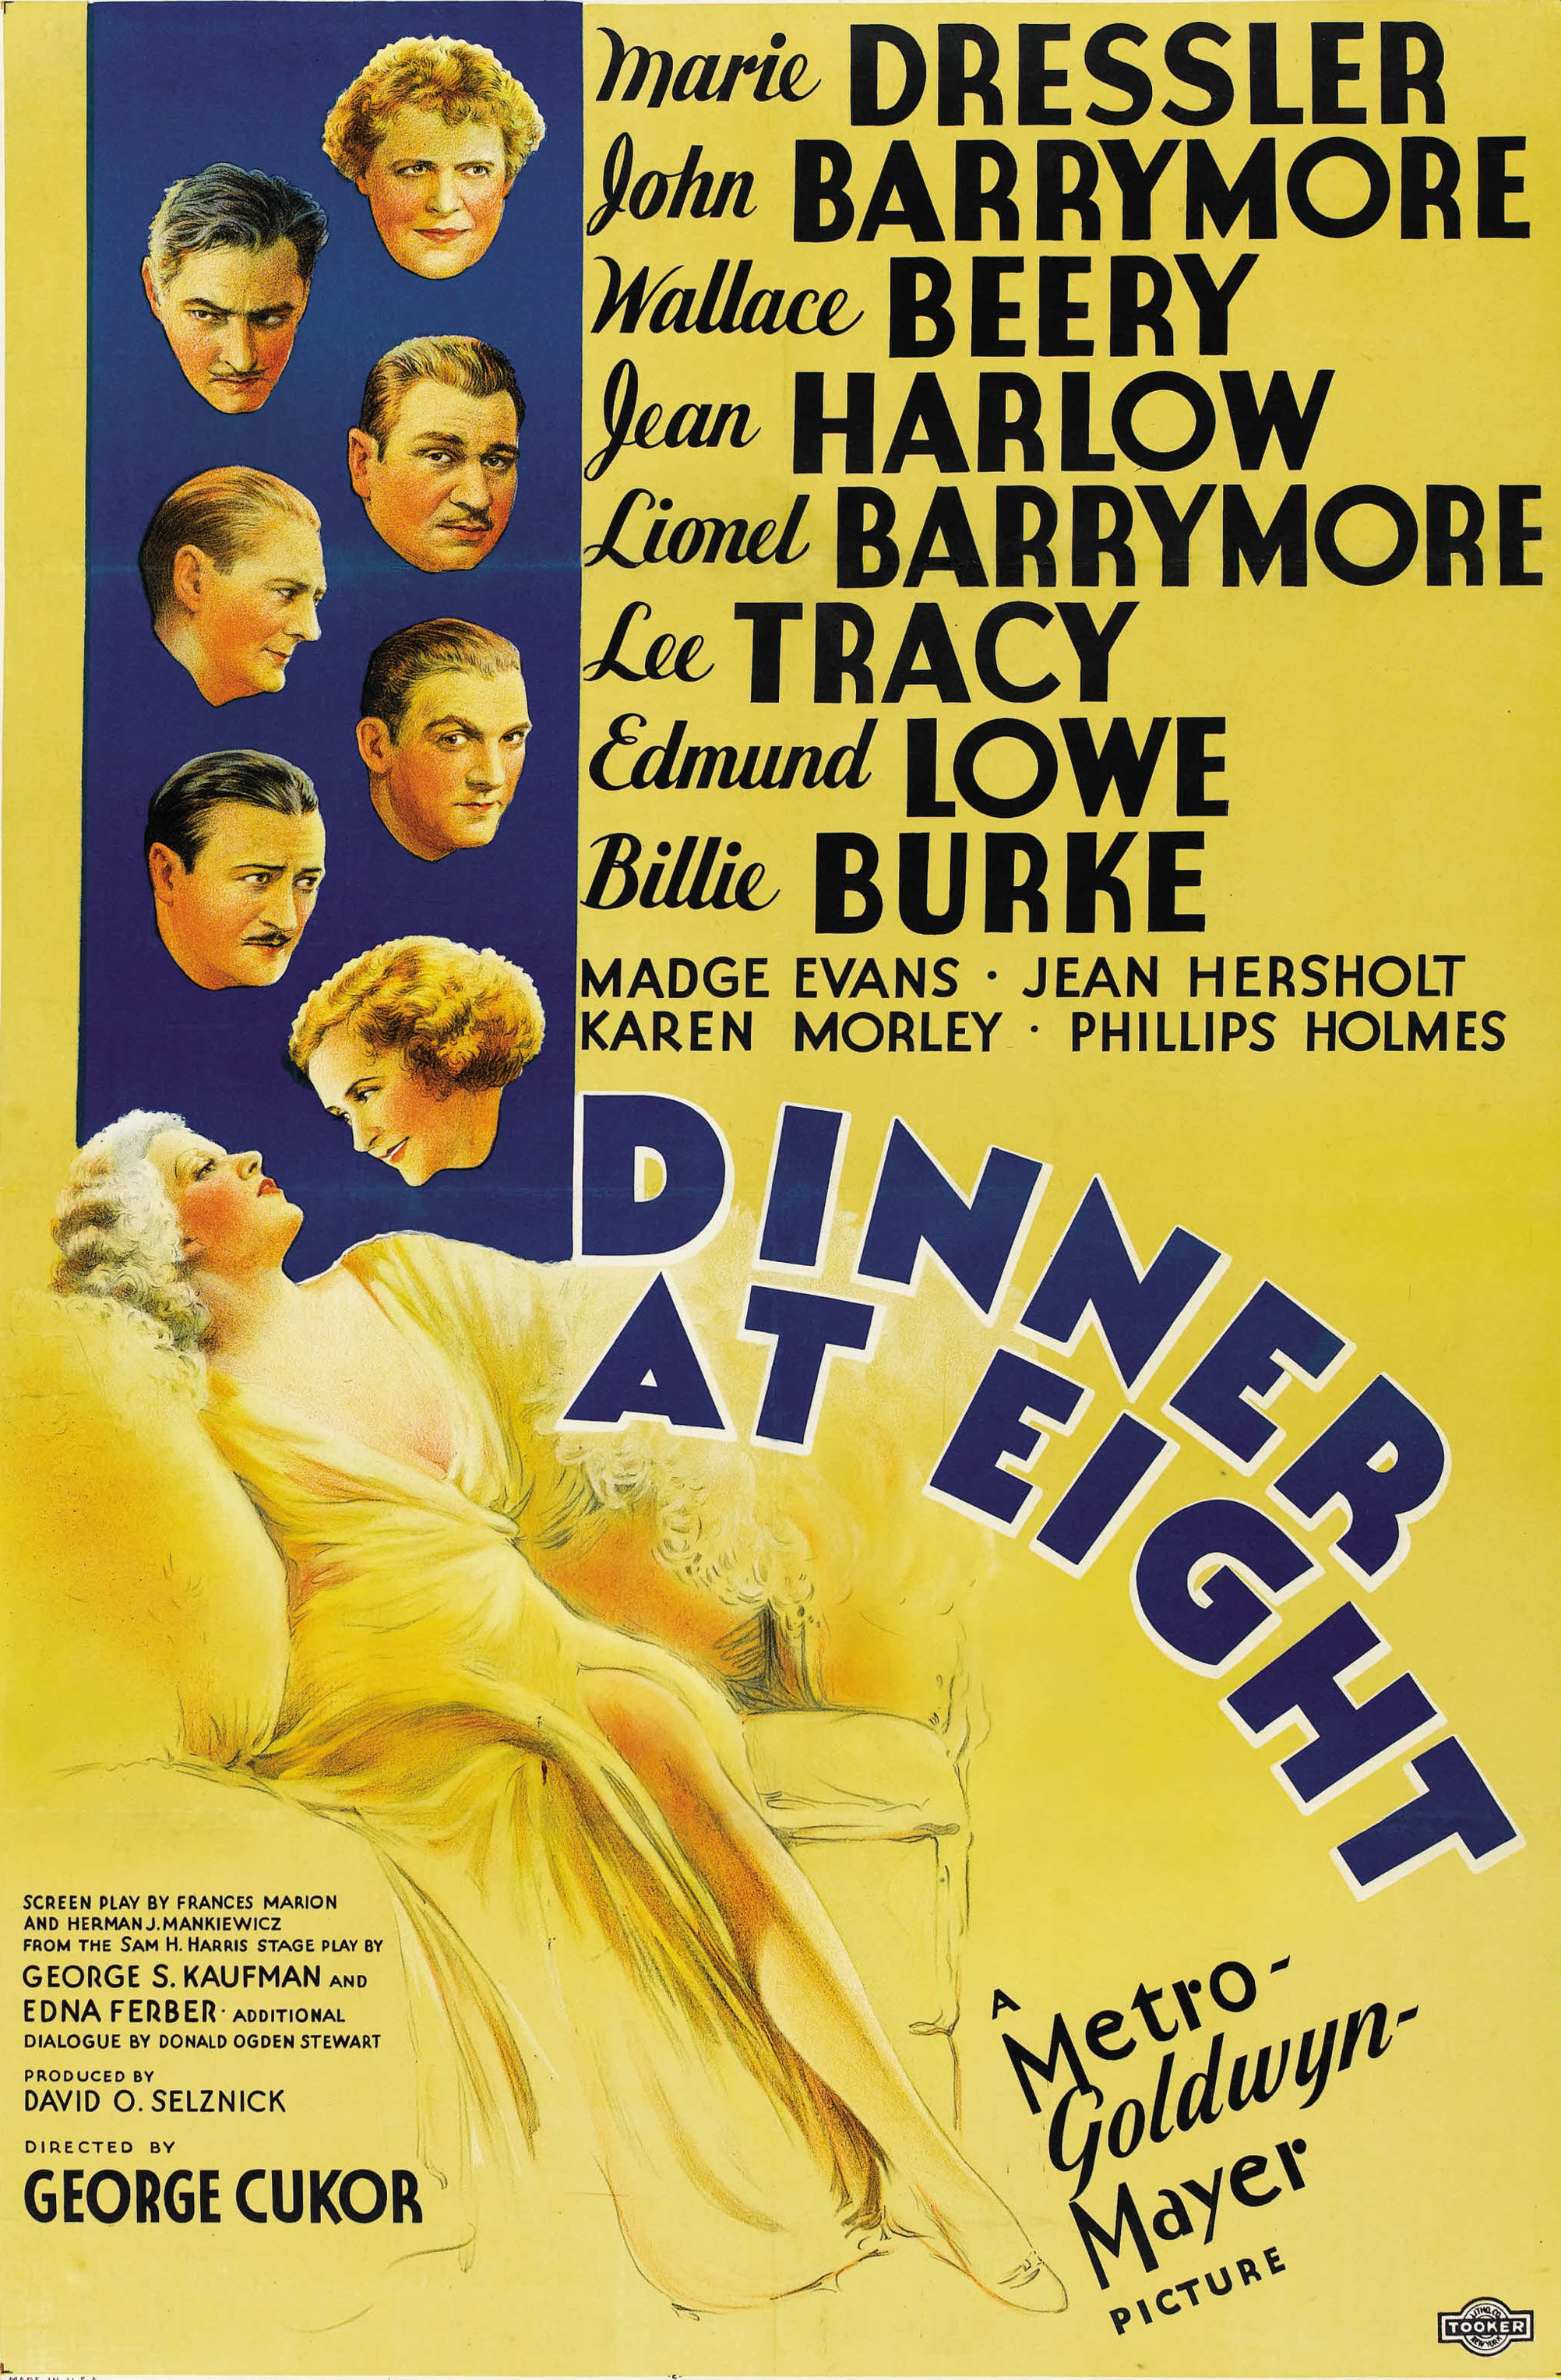 Movie Poster for Dinner at Eight. 